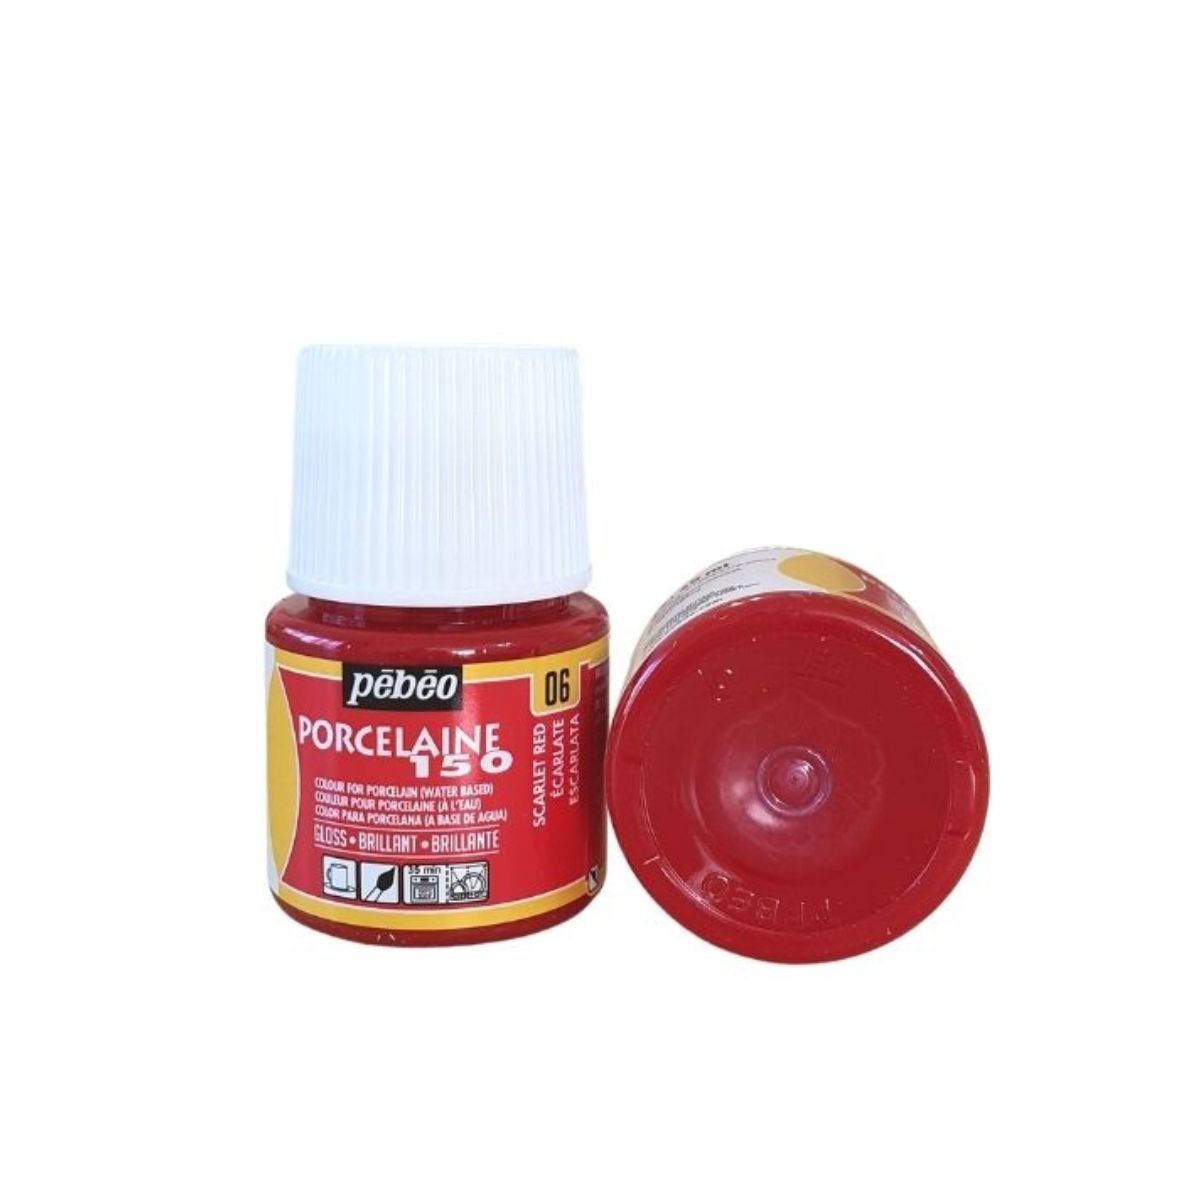 pebeo porcelaine paint scarlet red